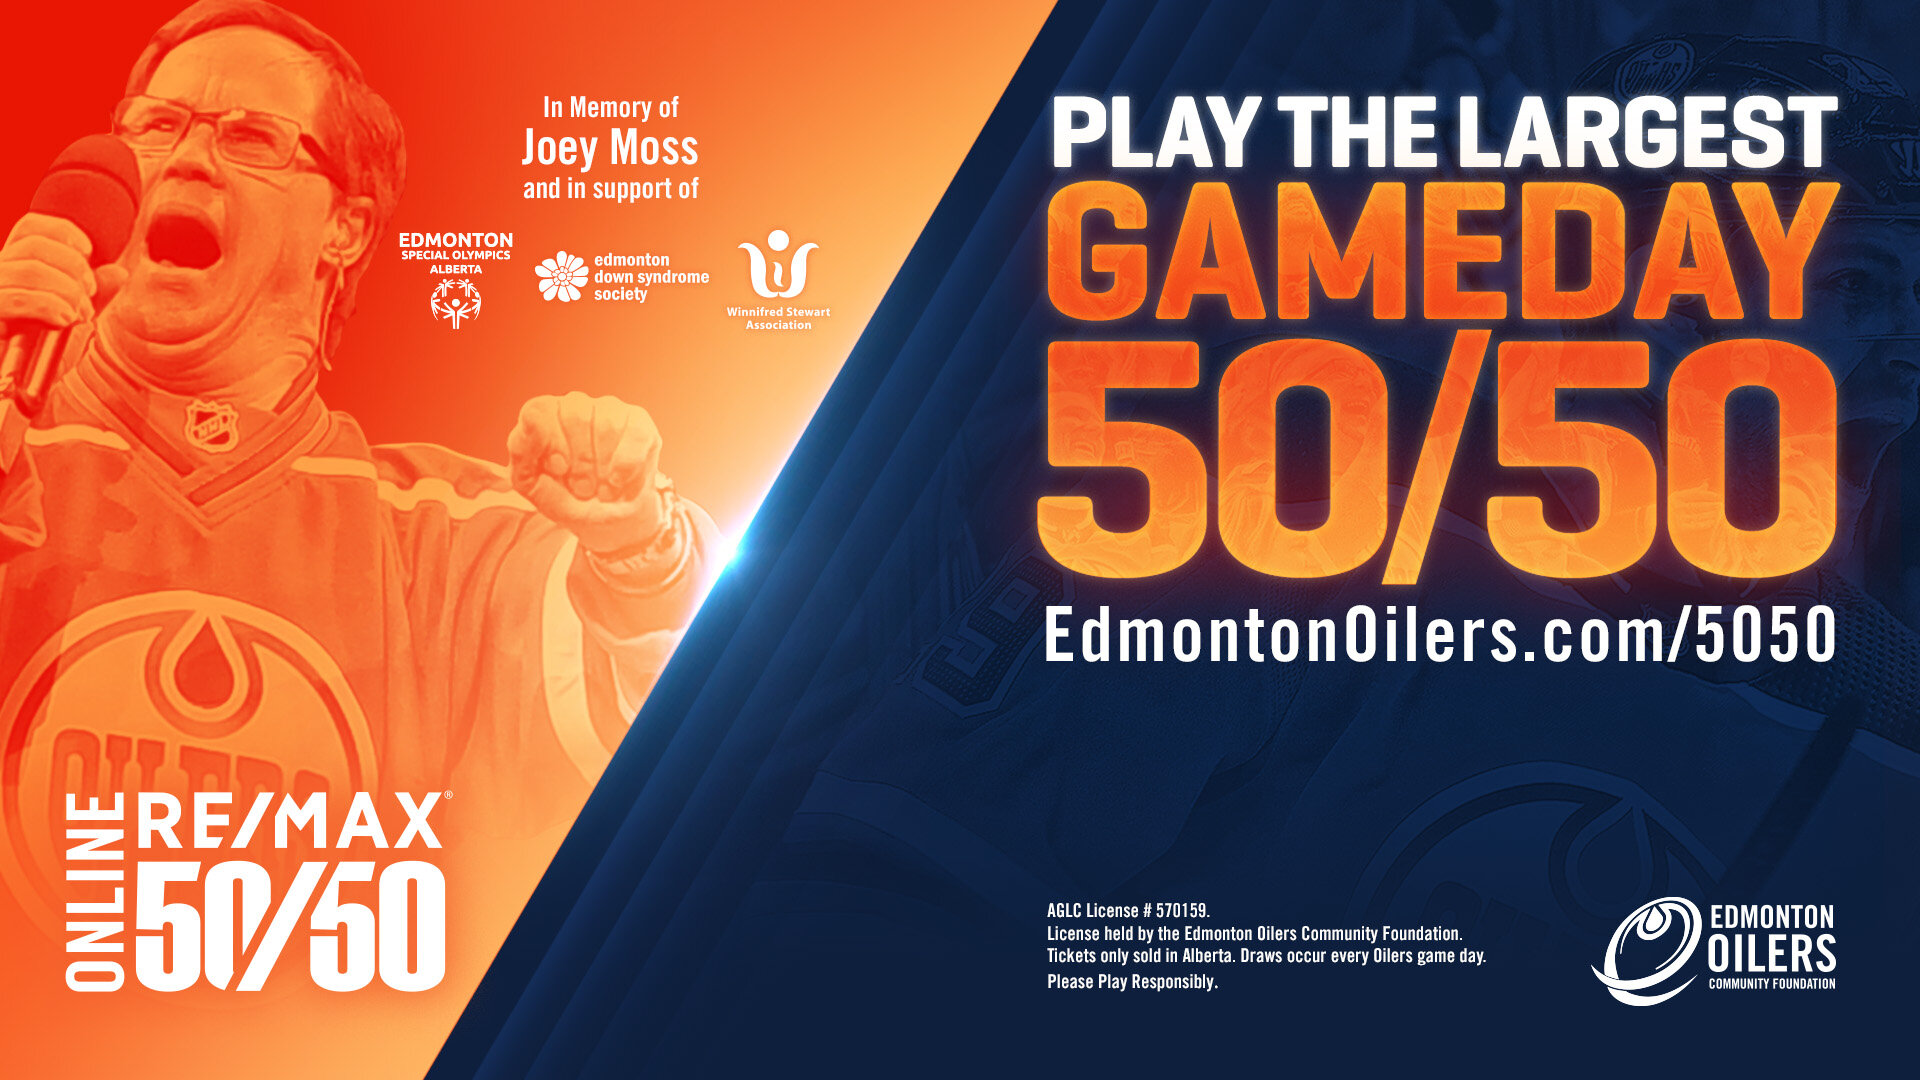 EDMONTON OILERS COMMUNITY FOUNDATION TO HOST RE/MAX ONLINE 50/50 NIGHT IN MEMORY OF JOEY MOSS, IN Support OF WSA, EDSS AND SOA — Winnifred Stewart